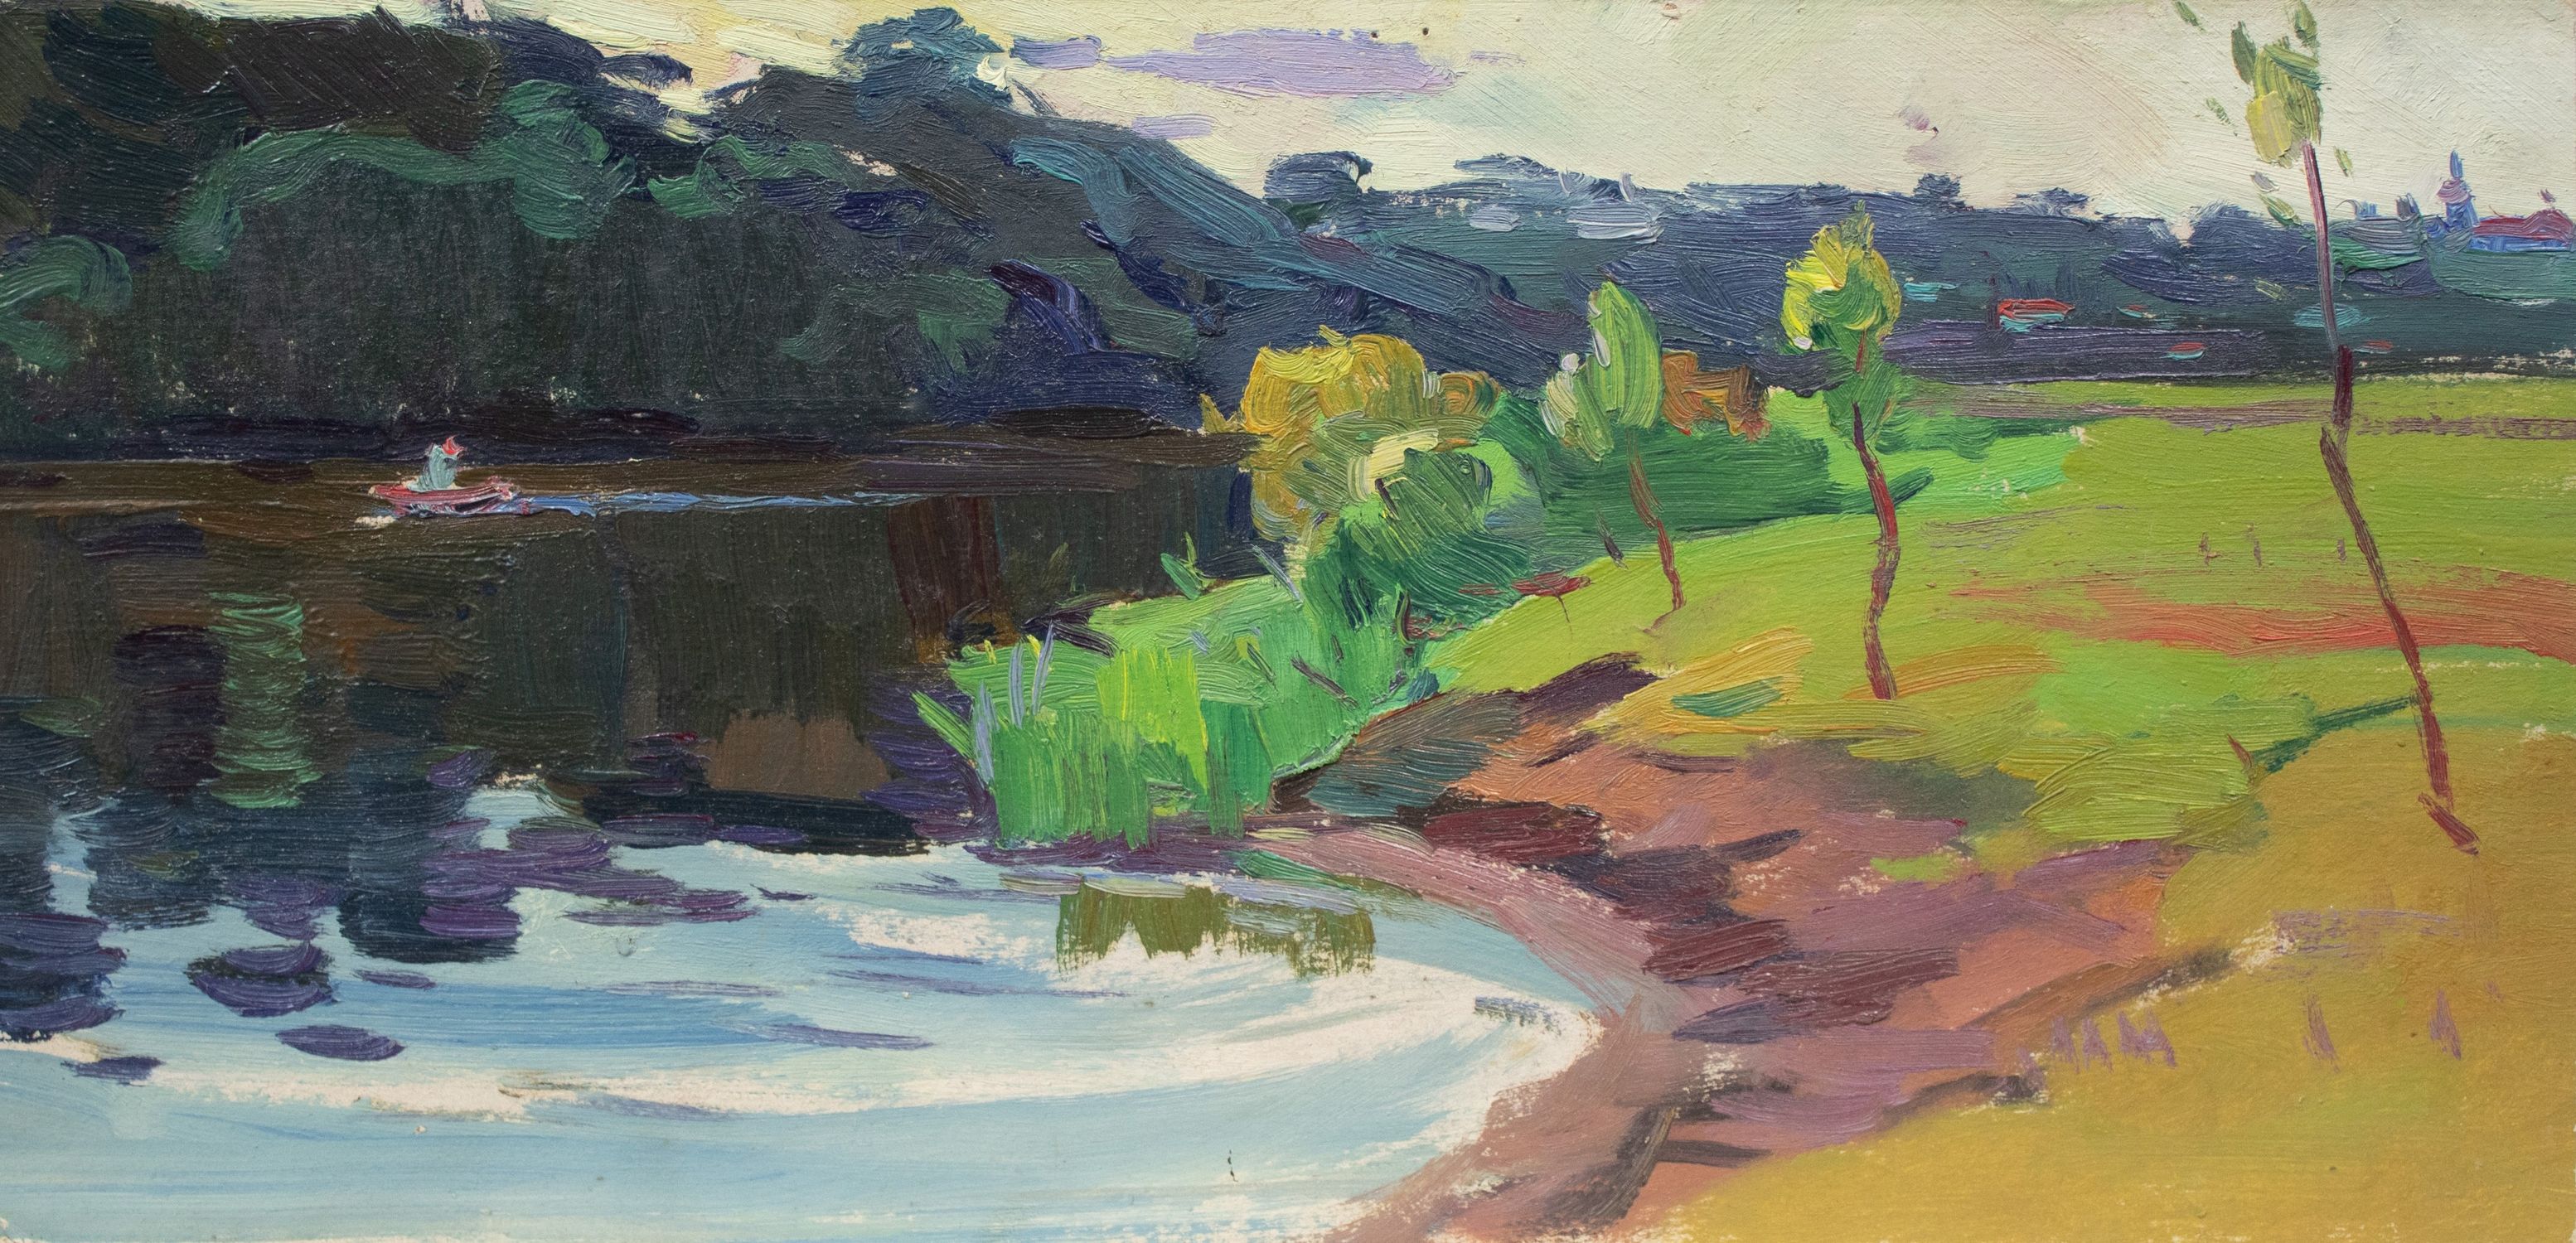 "Summer on the river"